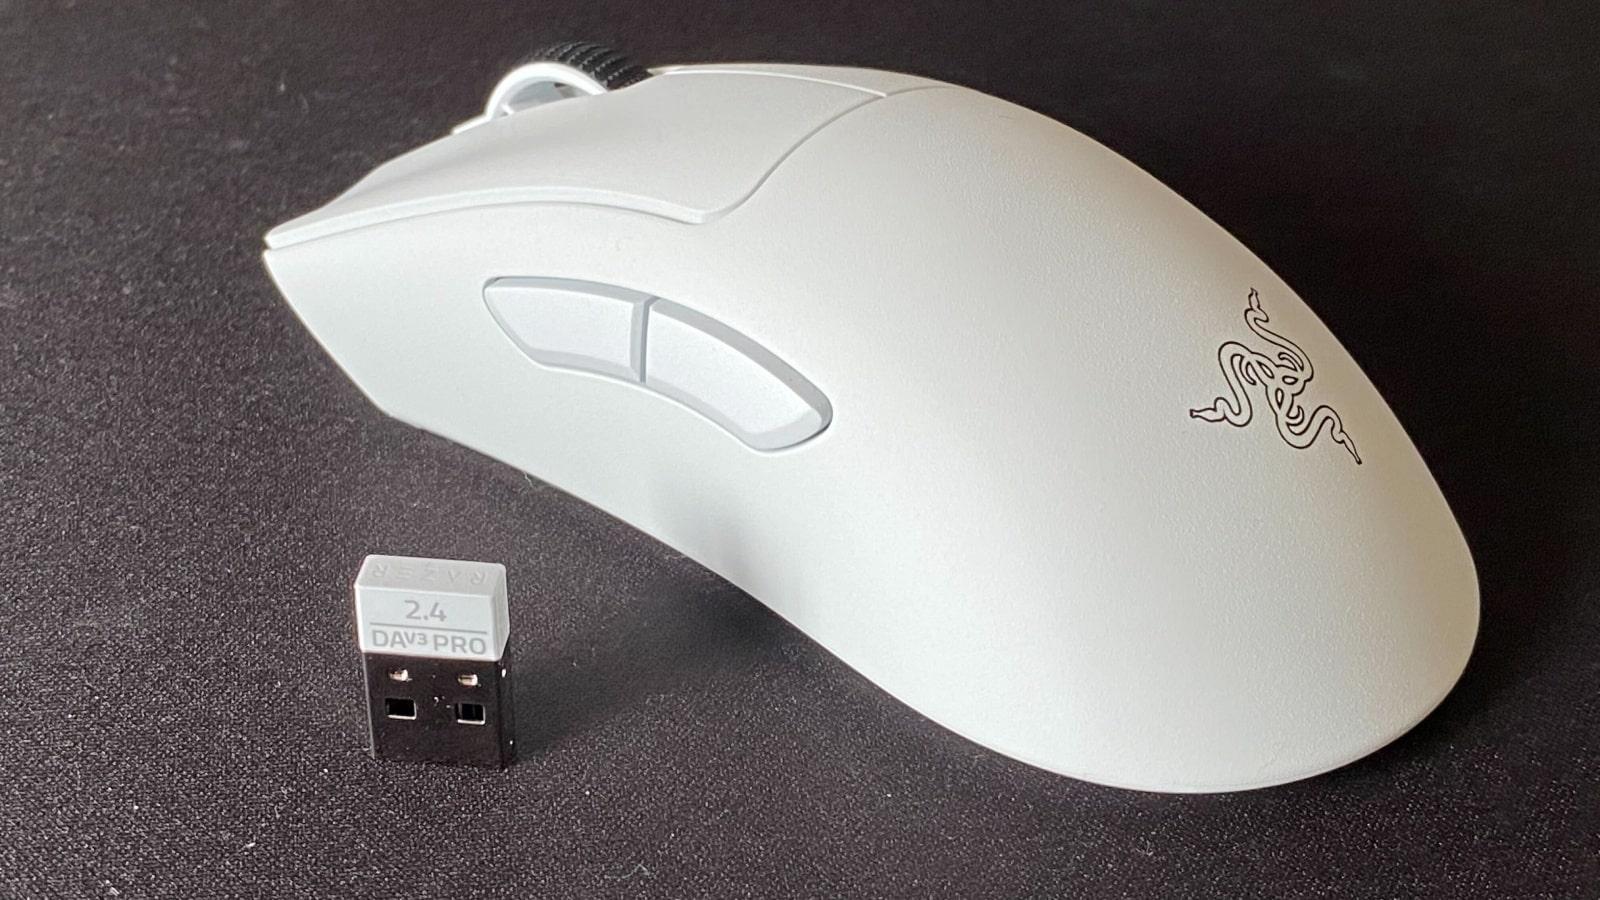 Deathadder V3 Pro with dongle